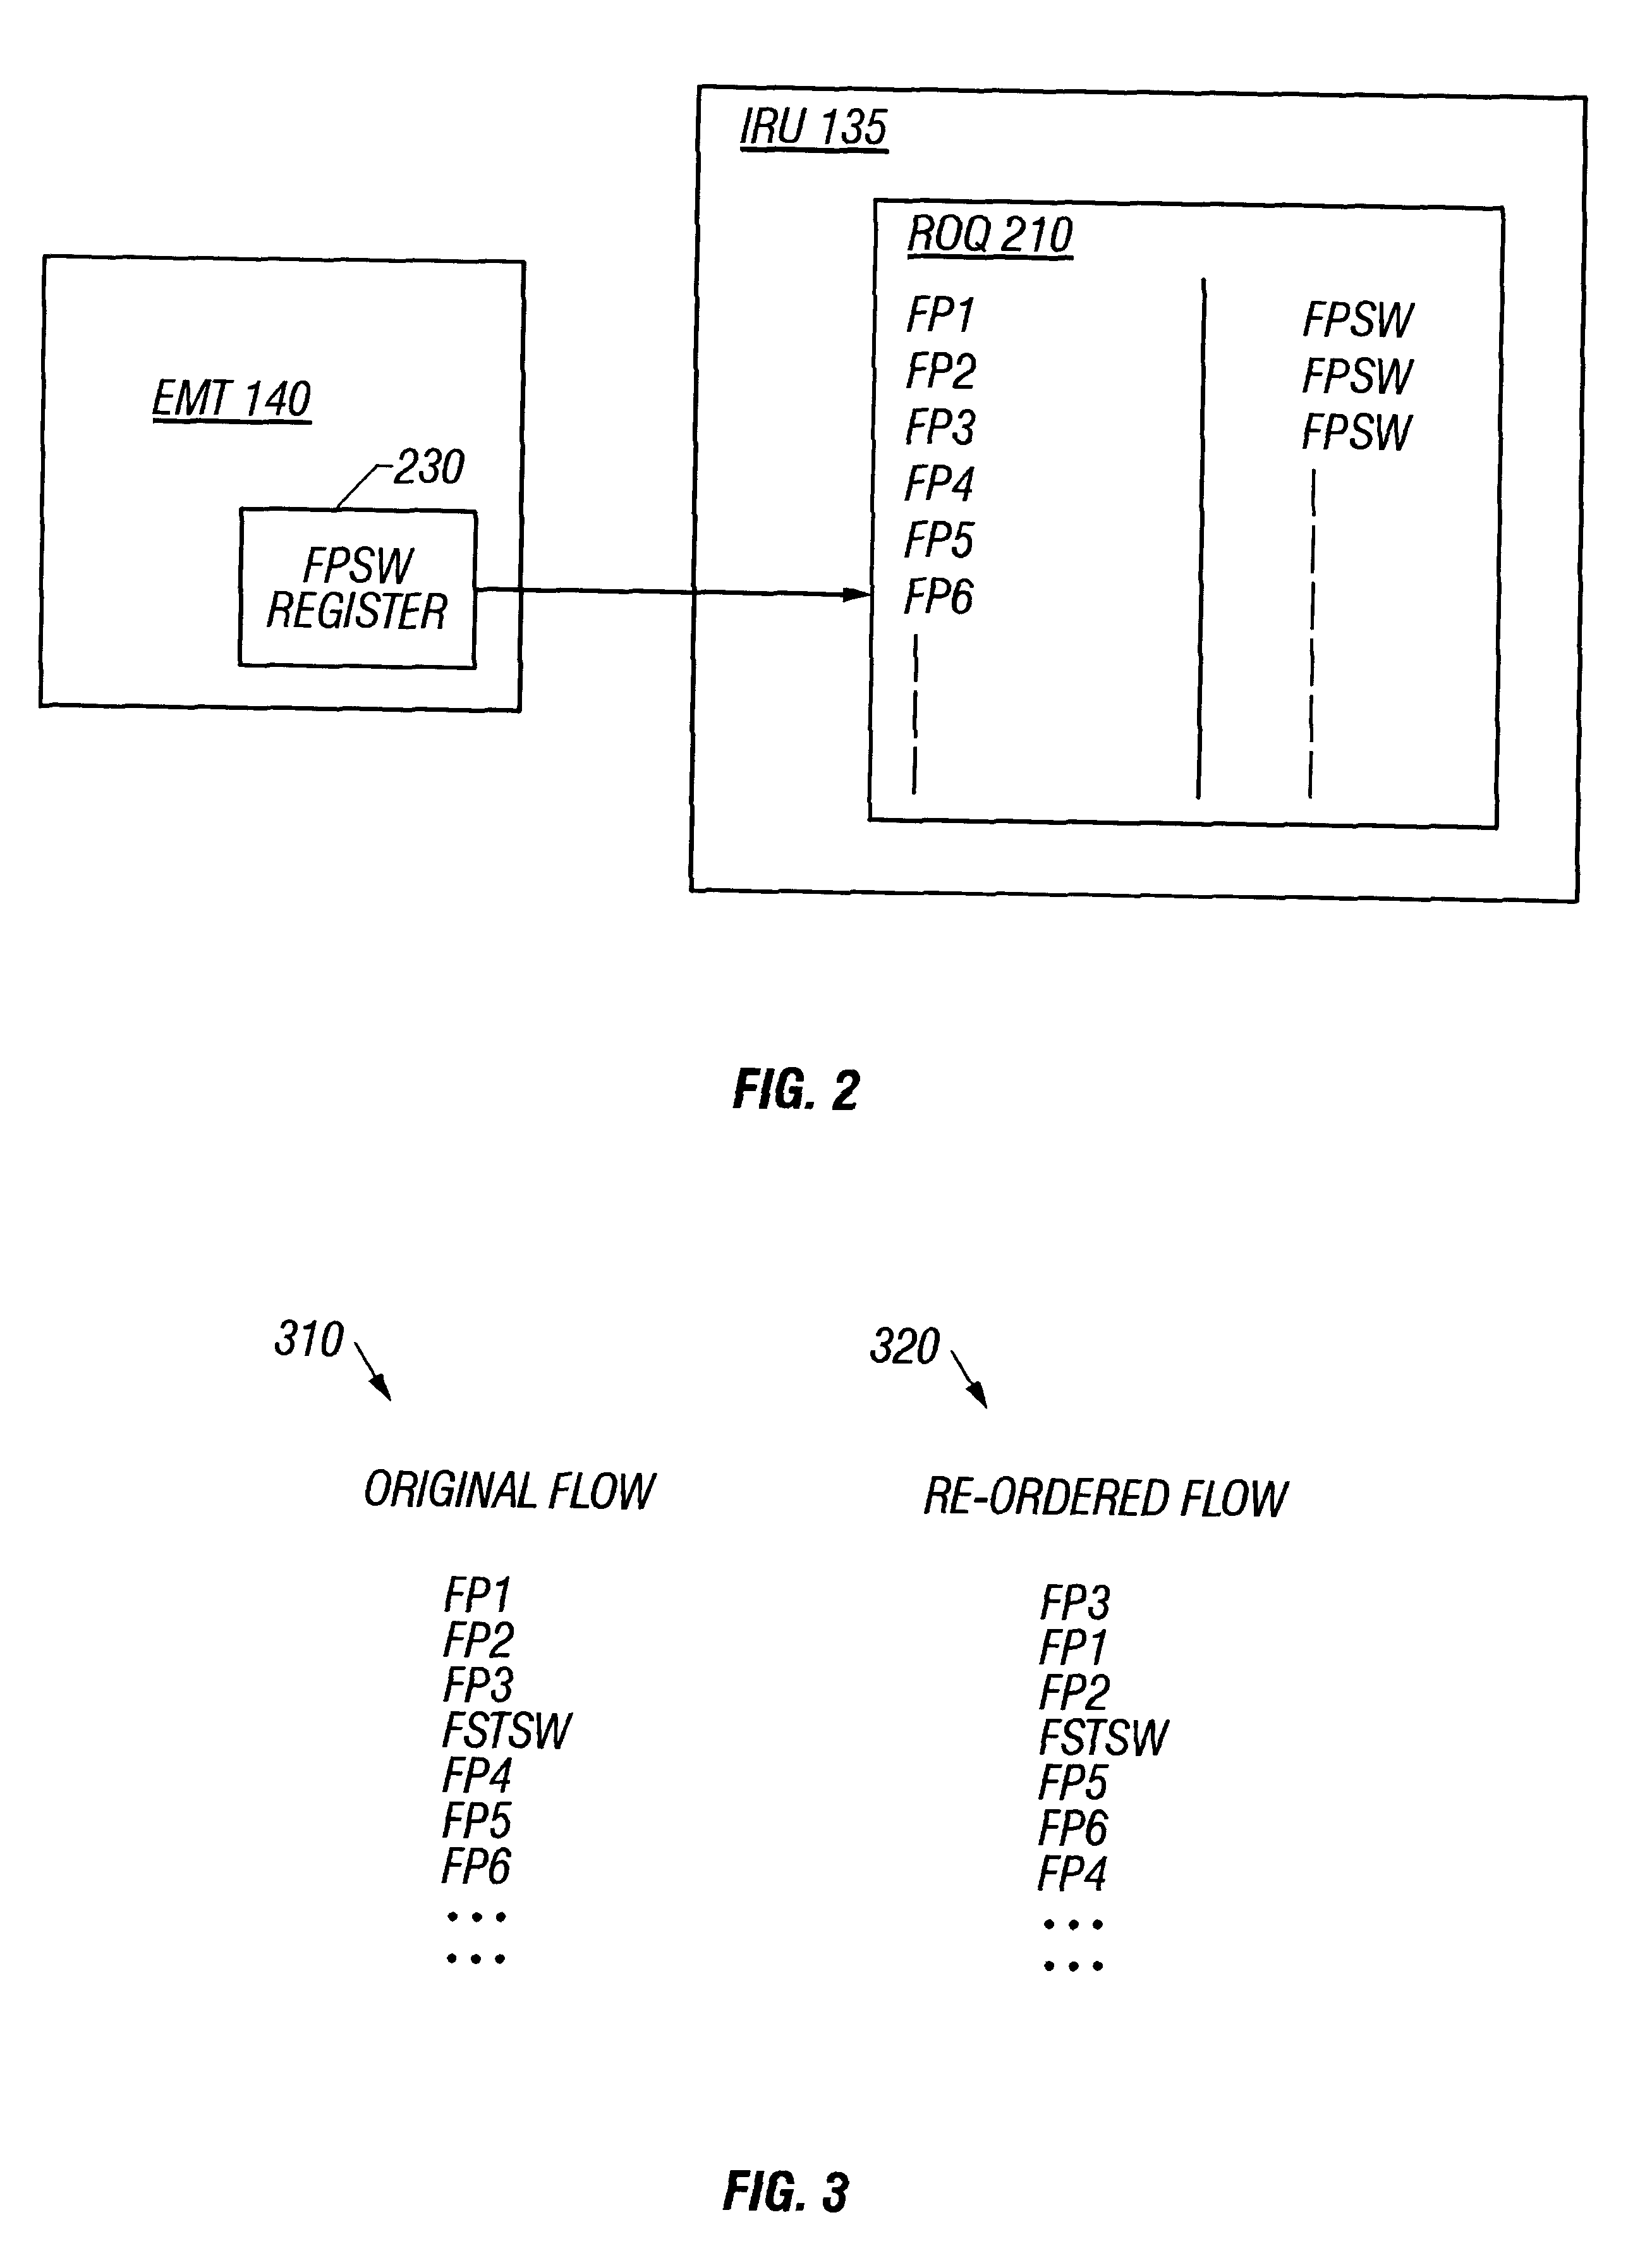 Method and apparatus for floating point (FP) status word handling in an out-of-order (000) Processor Pipeline